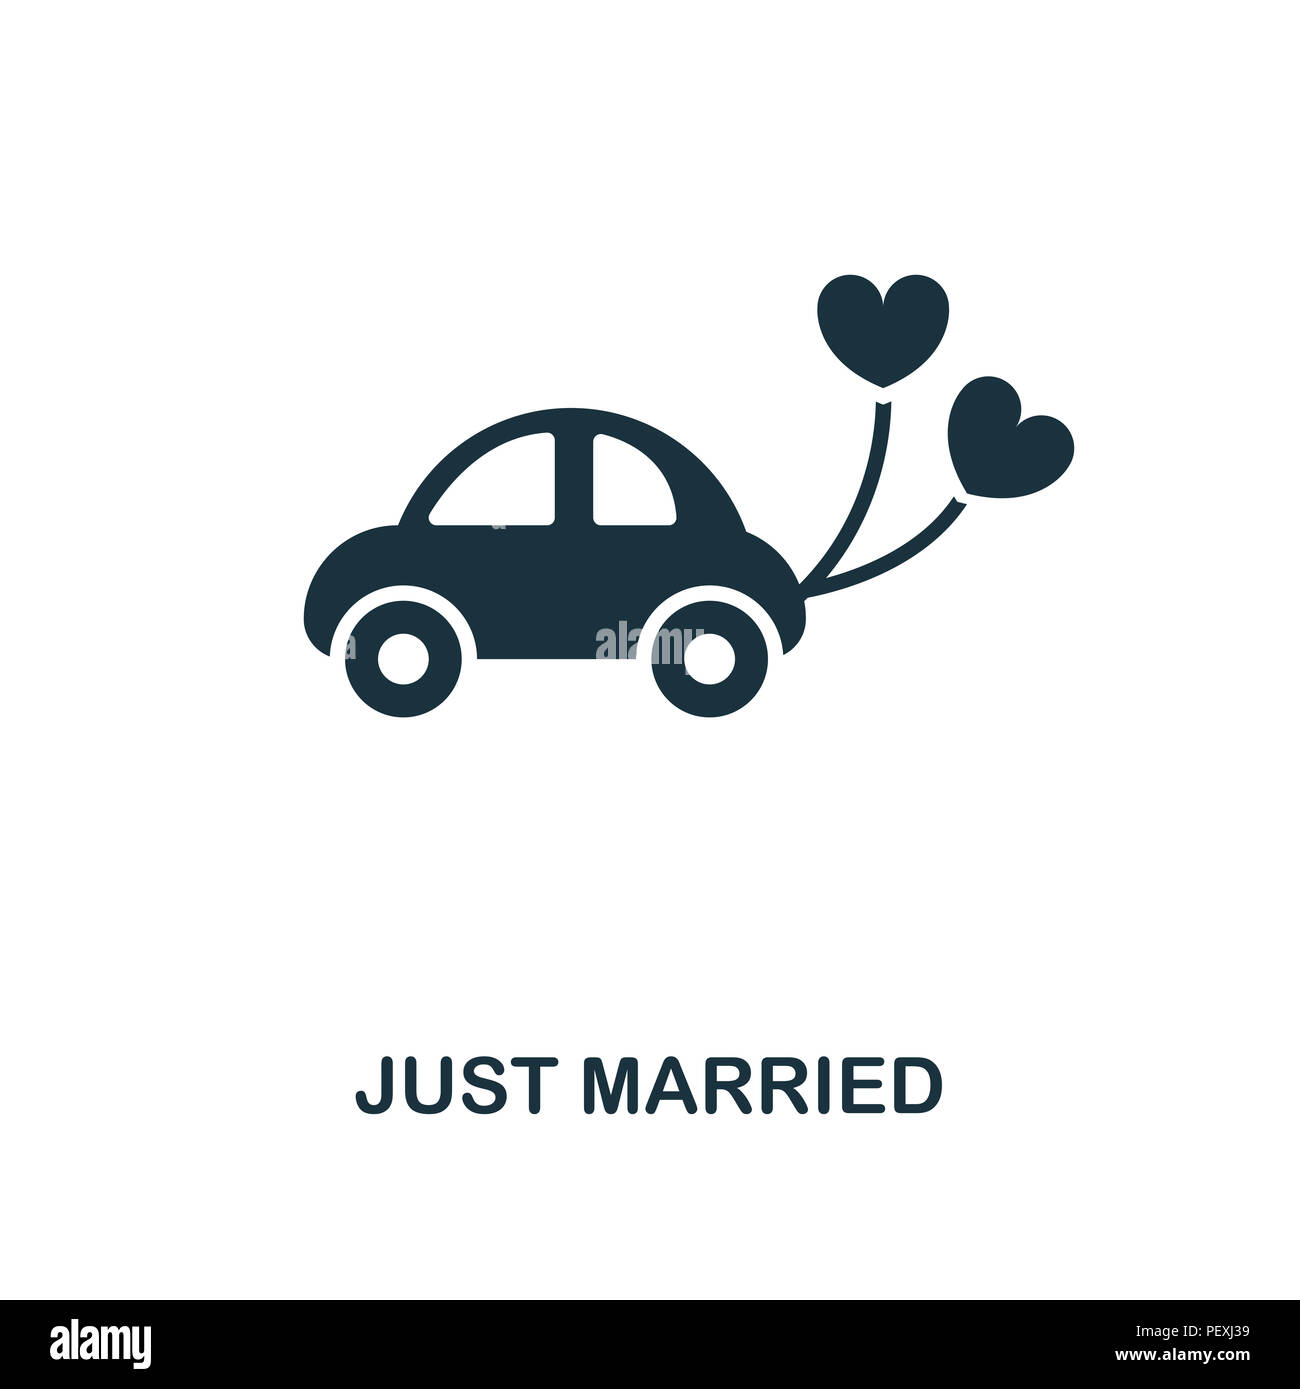 Just Married Car Stamp  Just married car, Custom rubber stamps, Just  married